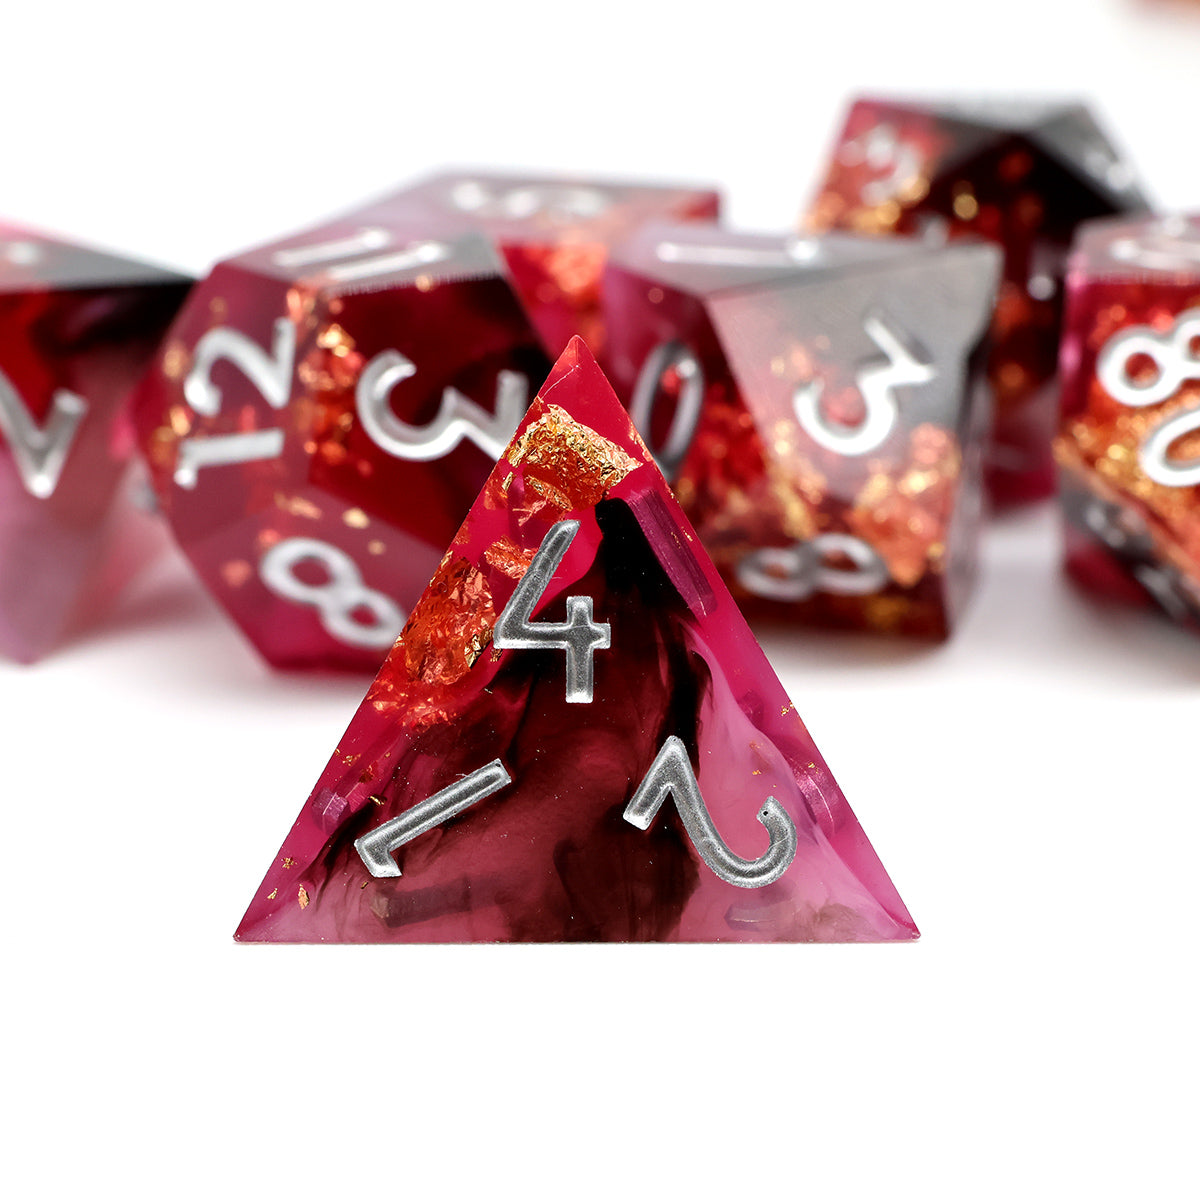 sharp edge dice for DND, with a Laudna vibe from Bells Hells, Critical Role and named after episode 28 the Deathwish Run